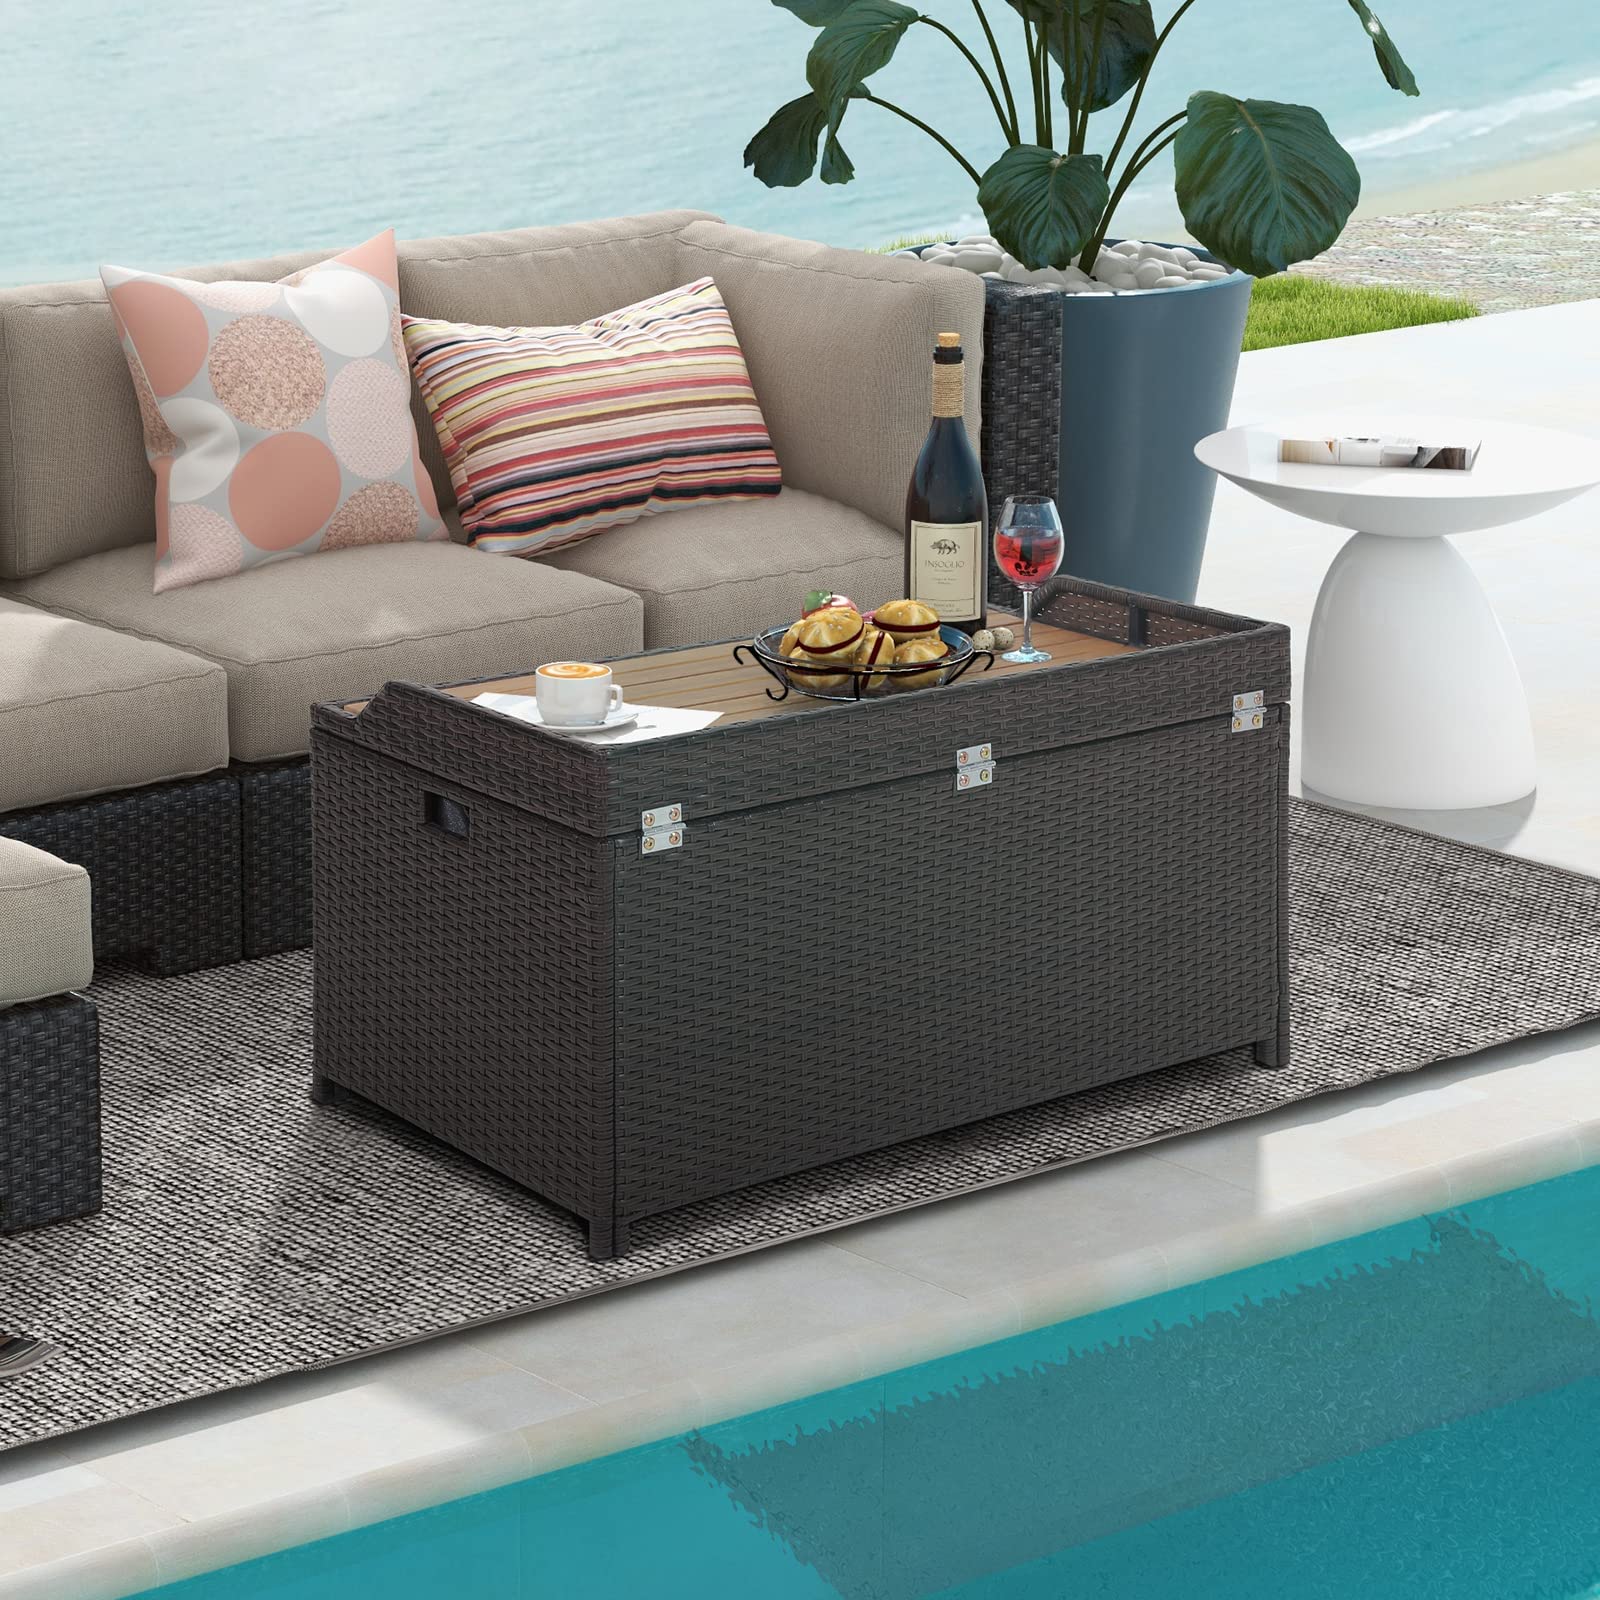 Maximize Your Outdoor Space with the 10 Best Storage Options